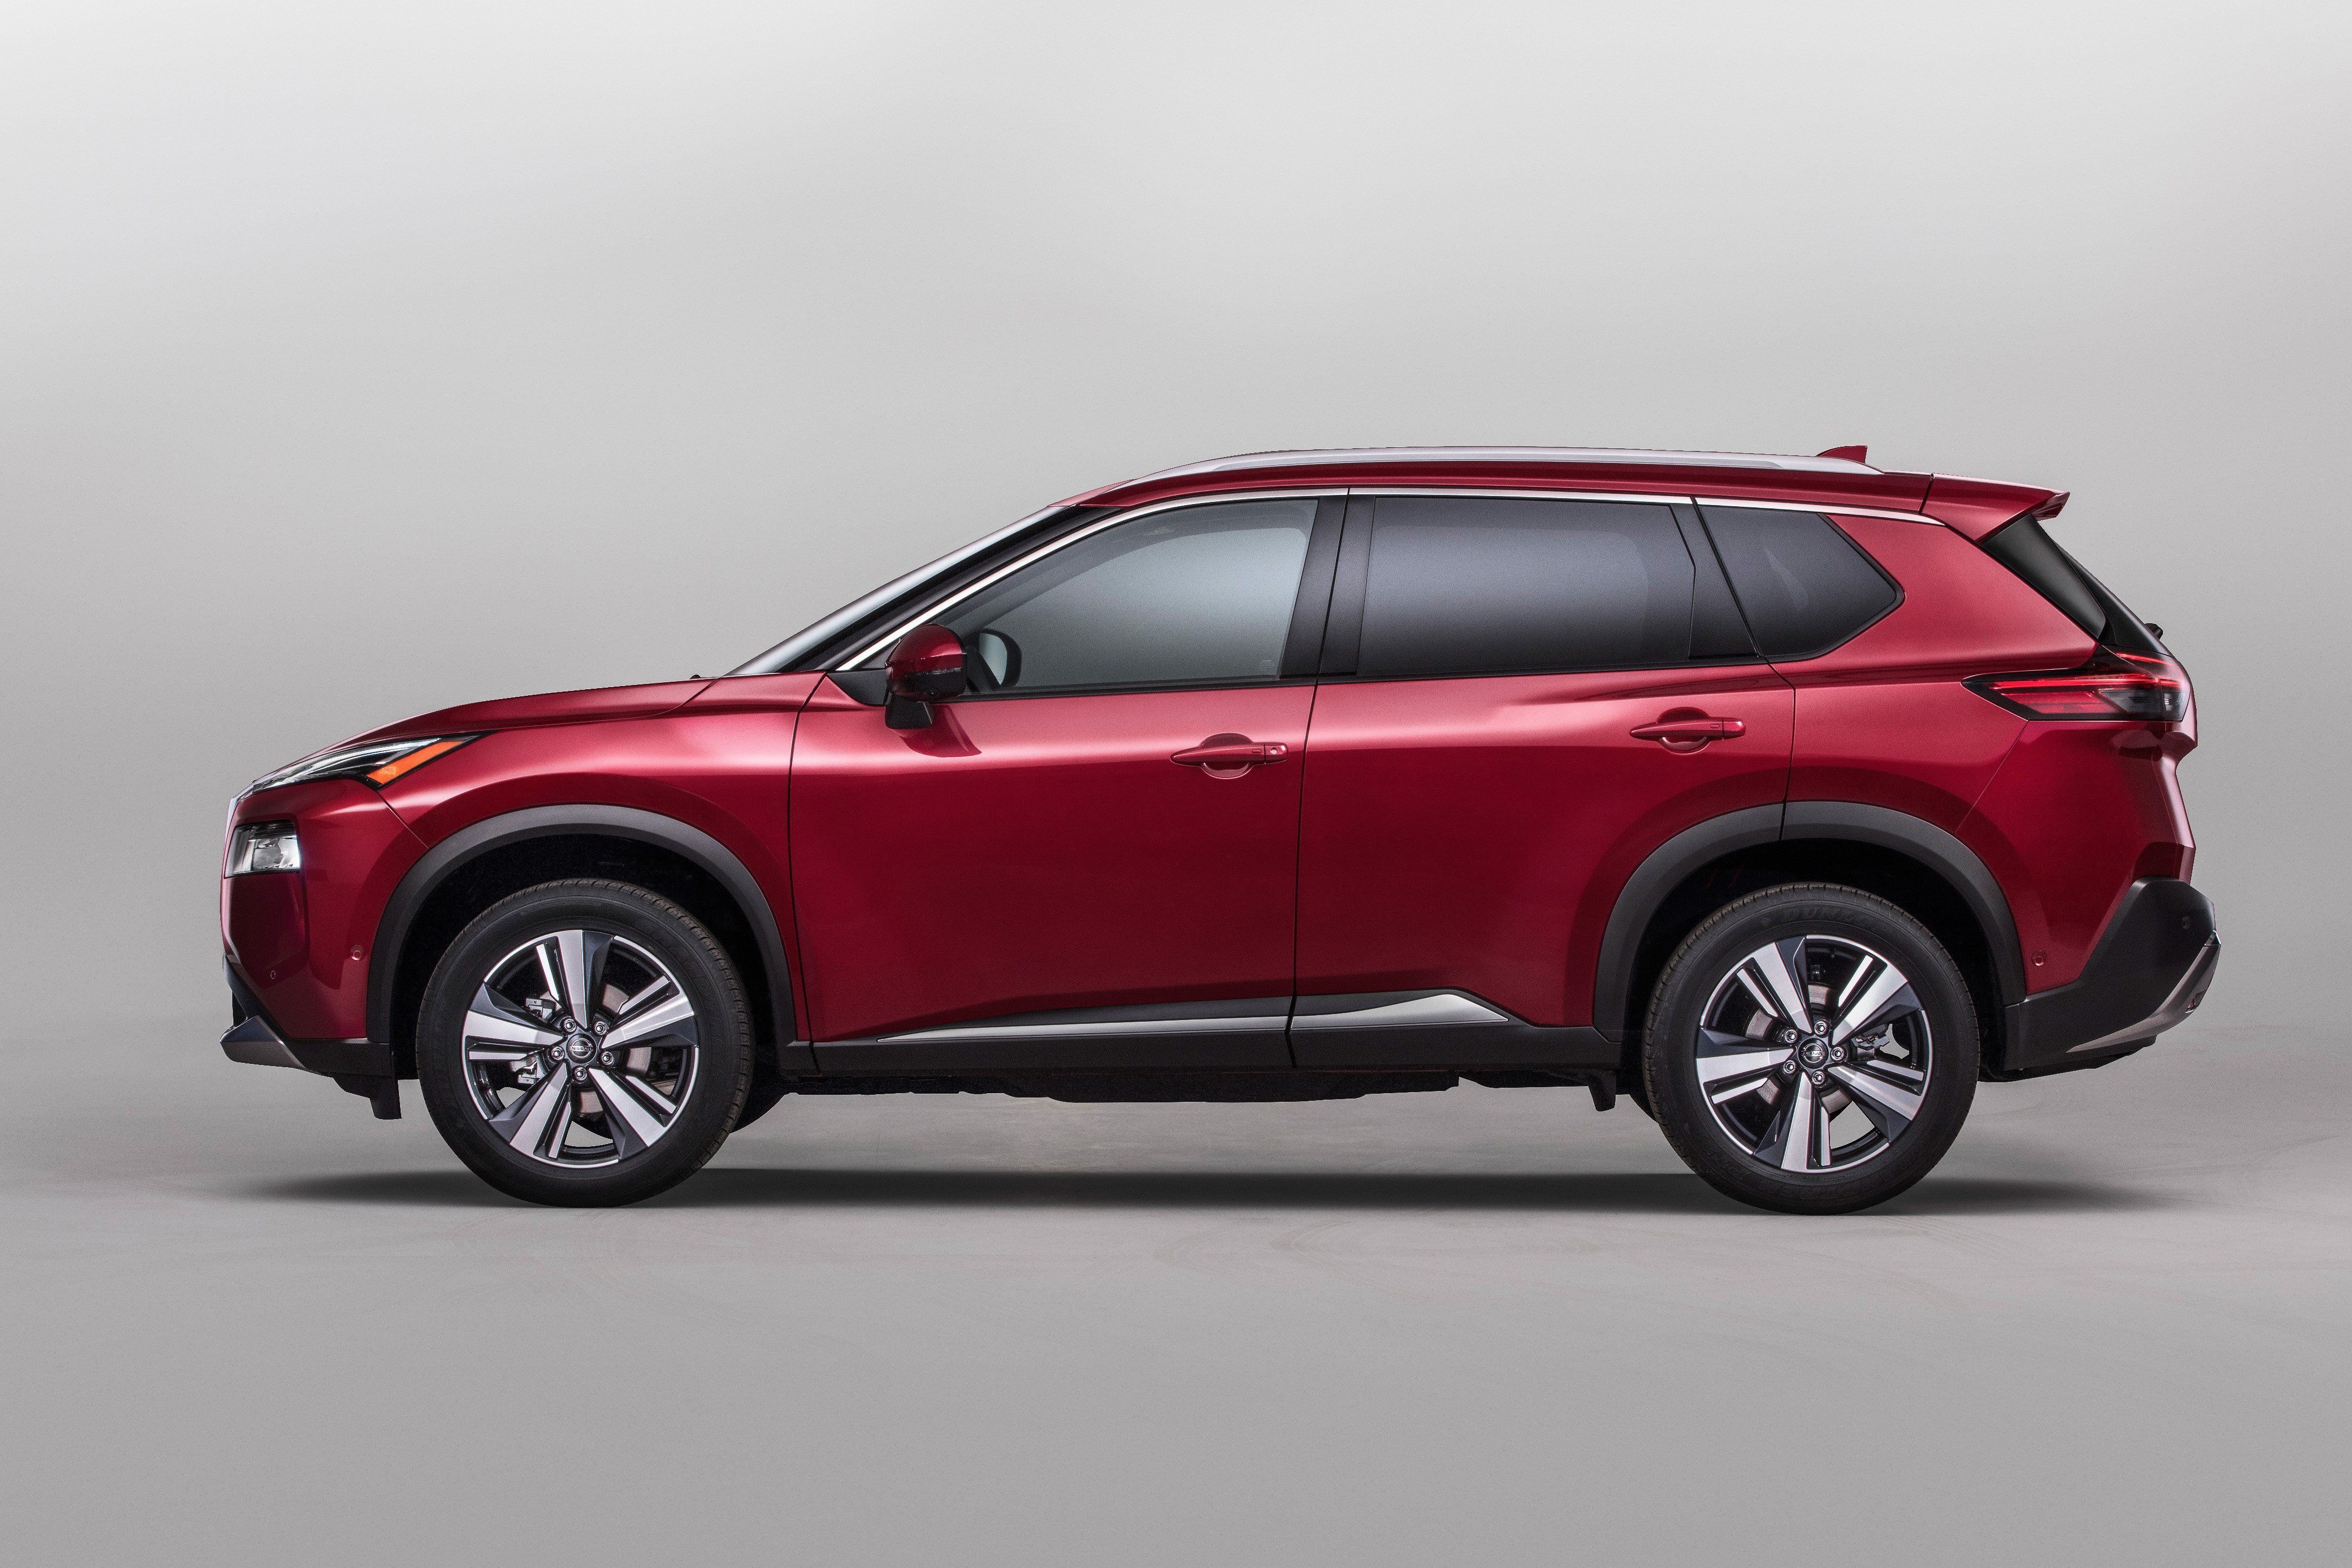 New 2021 Nissan Rogue Crossover Utility Vehicle Going On Sale From